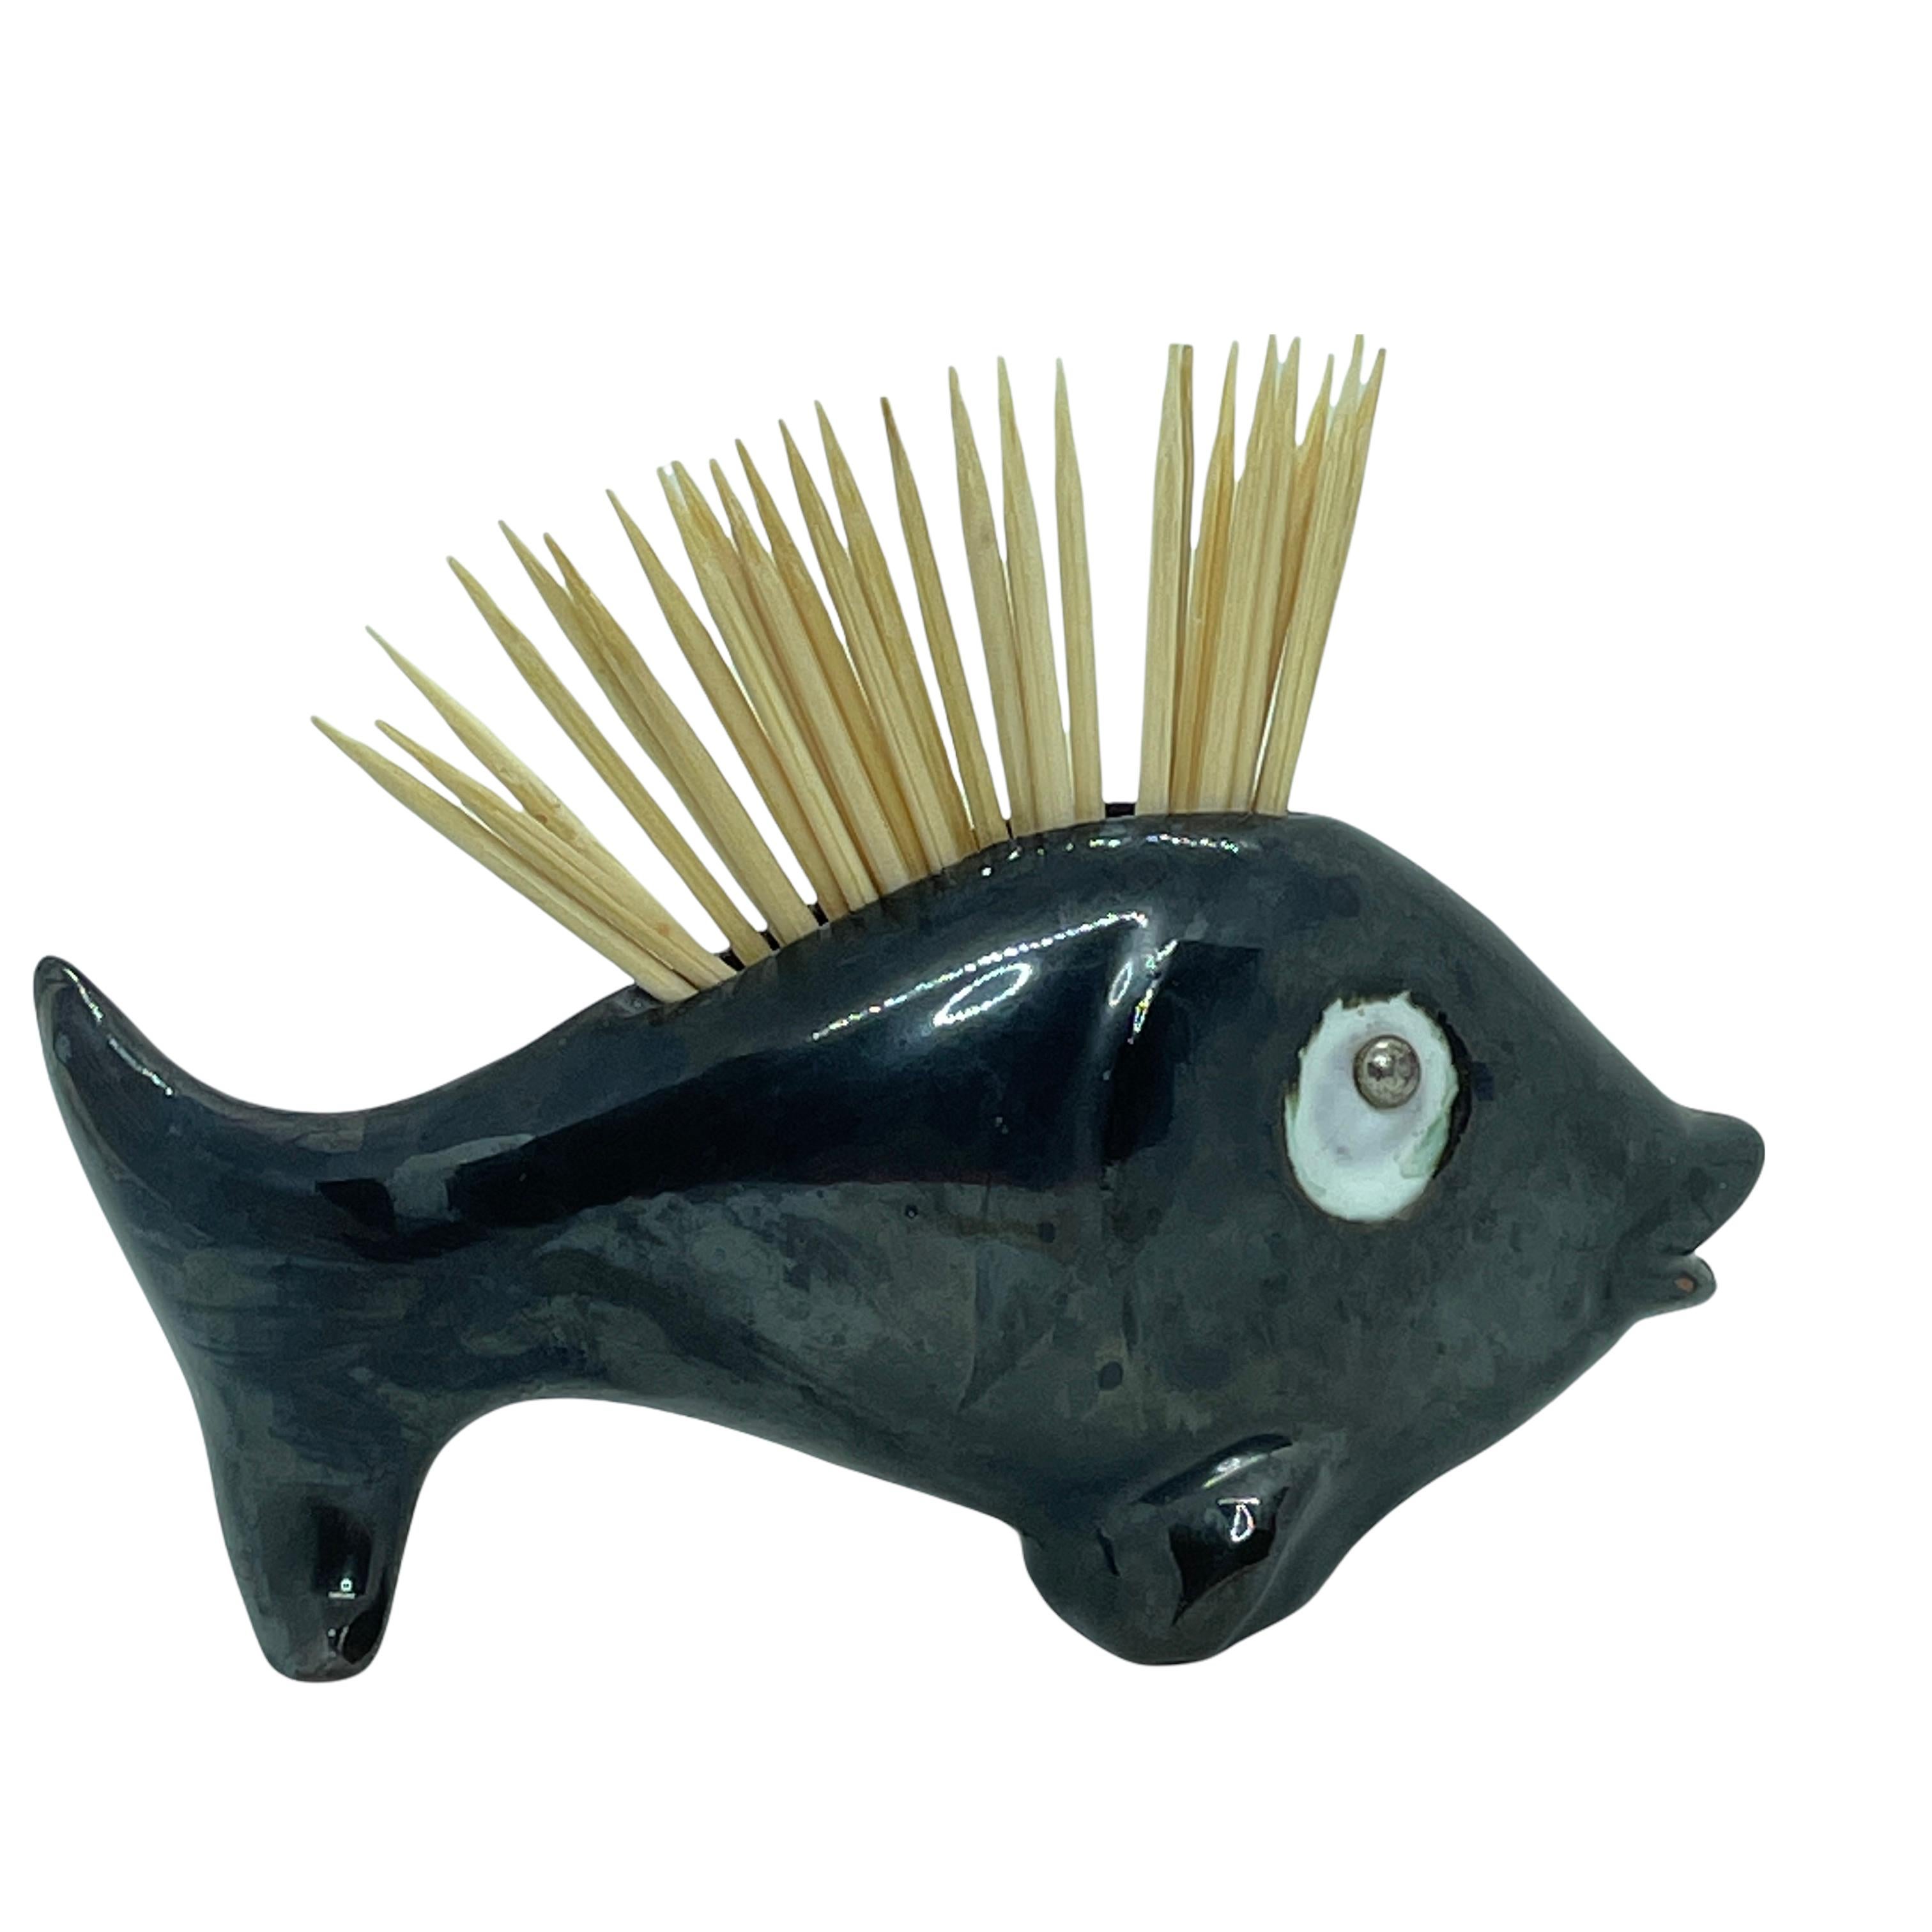 Mid-Century Modern Fish Midcentury Ceramic Toothpick Stand by Leopold Anzengruber, Vienna Austria For Sale